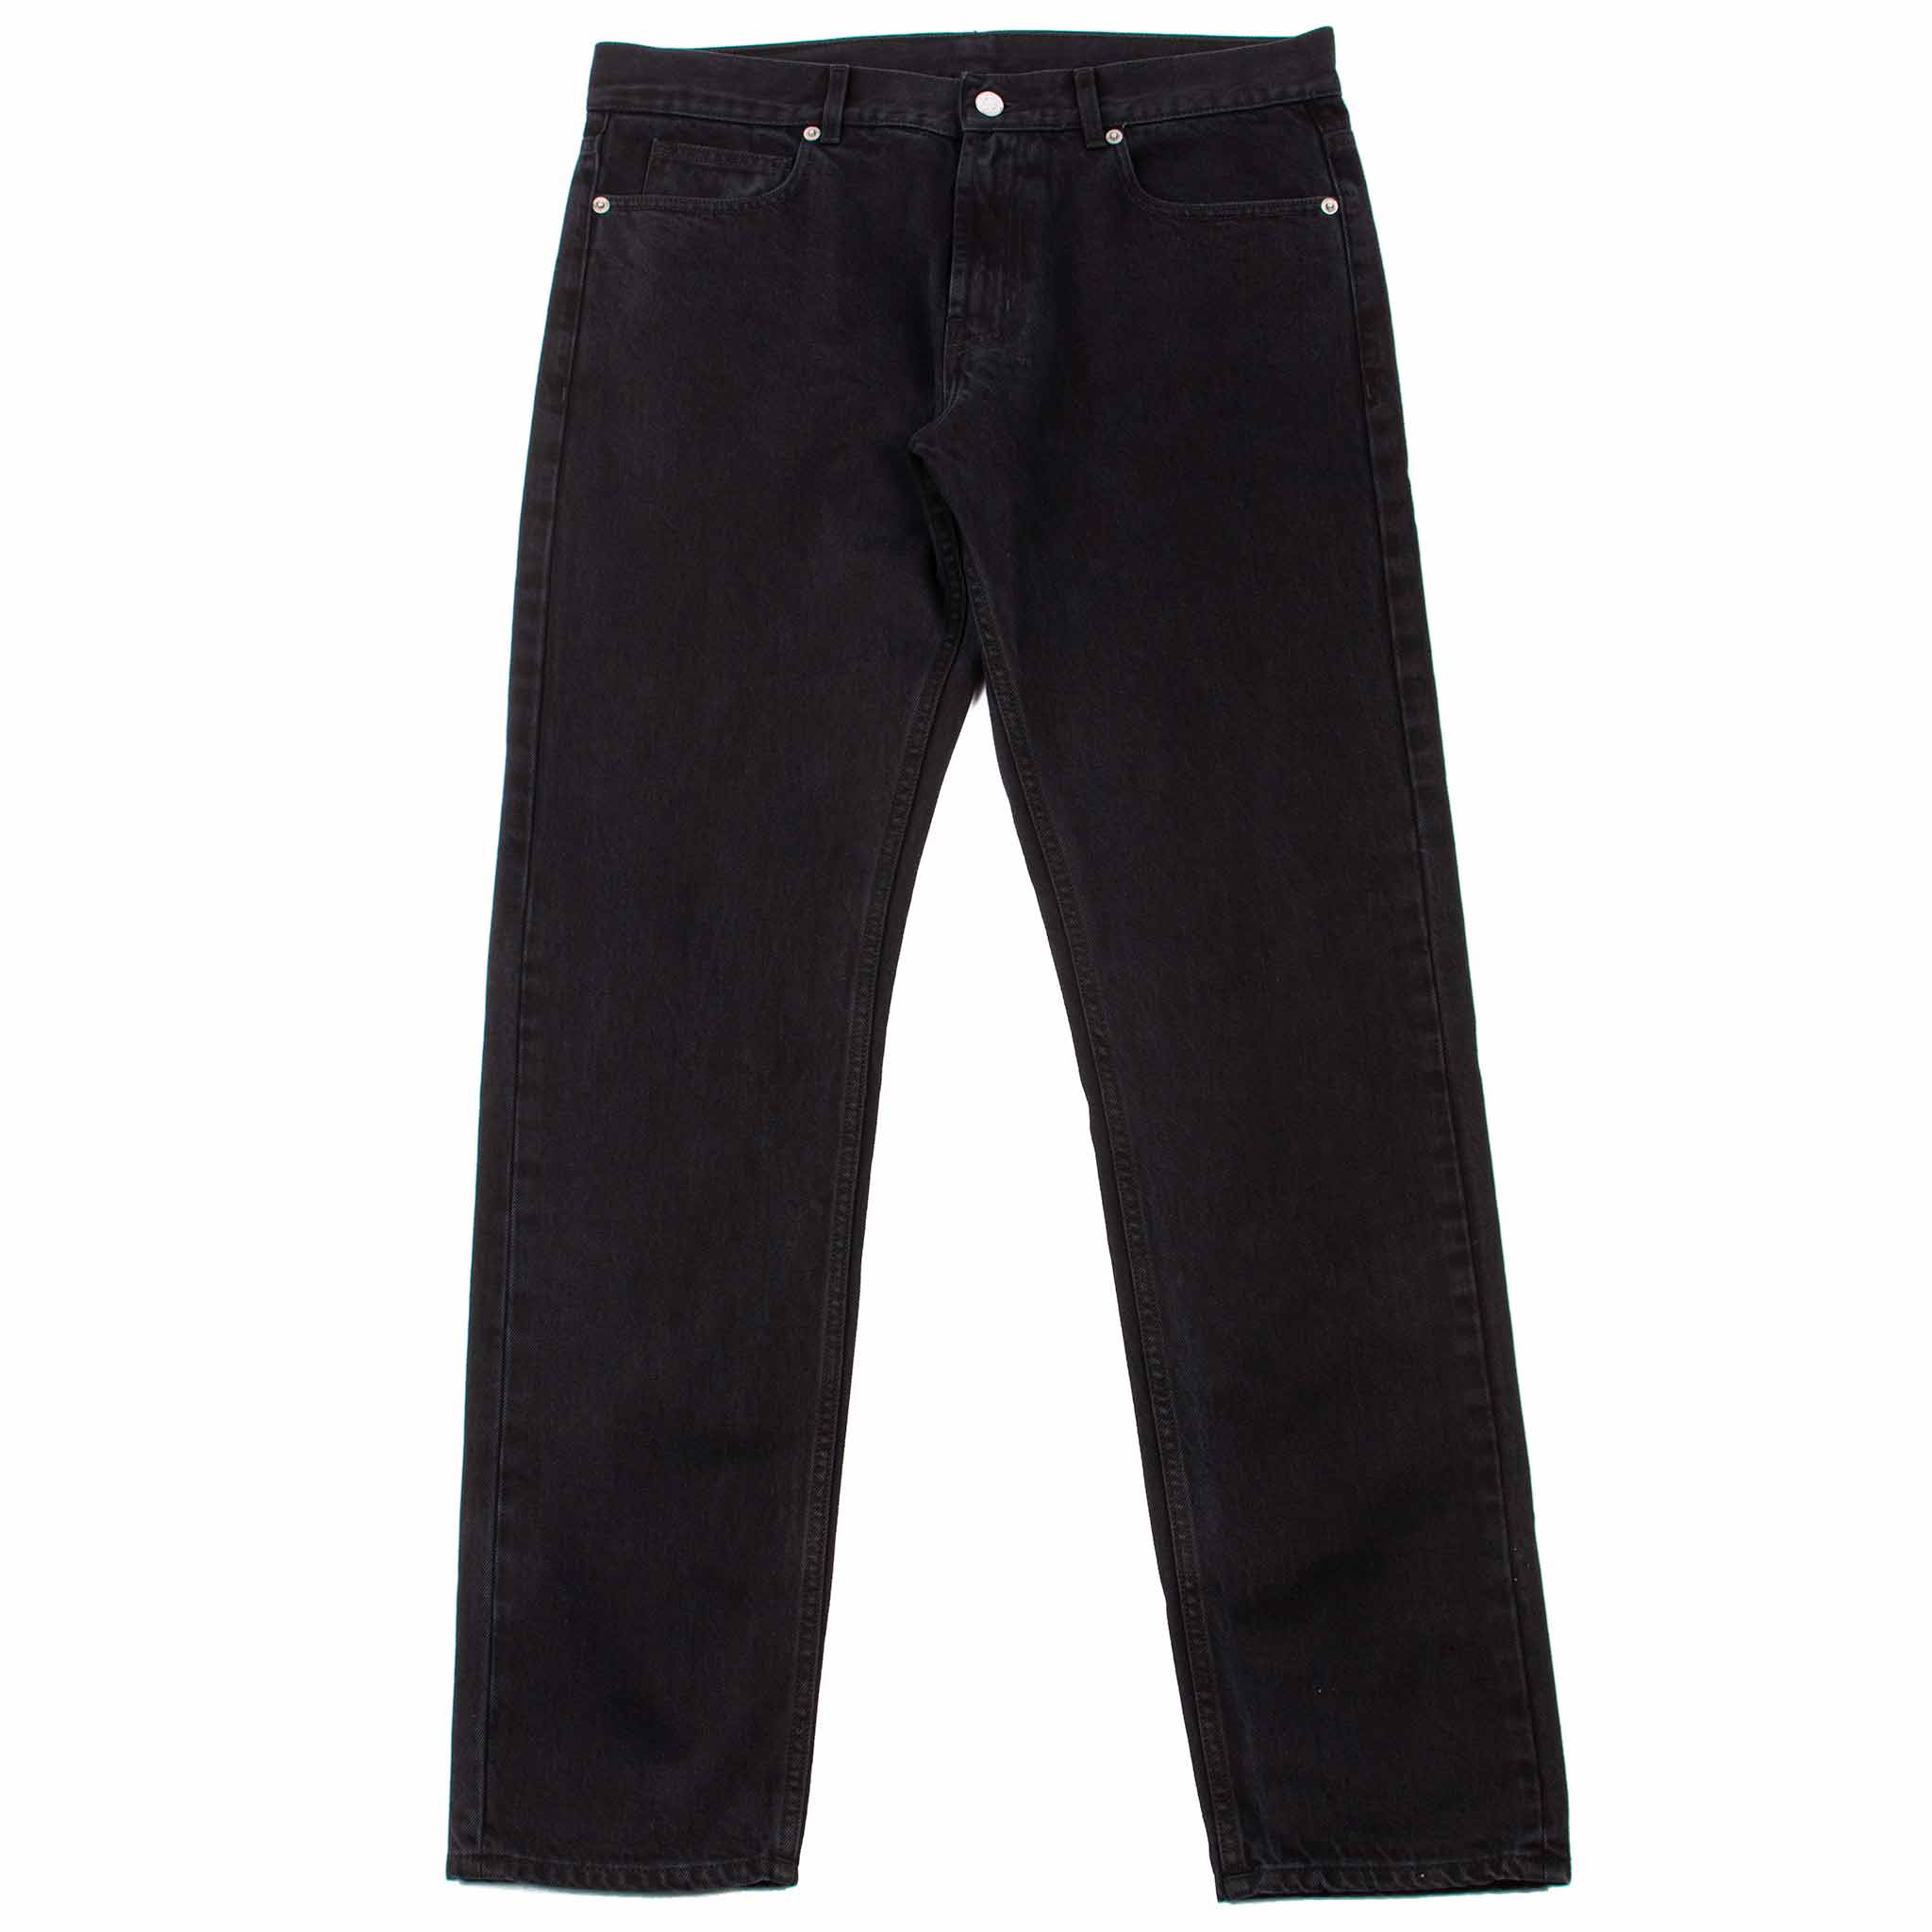 Norse Projects Norse Slim Denim Black Rinsed